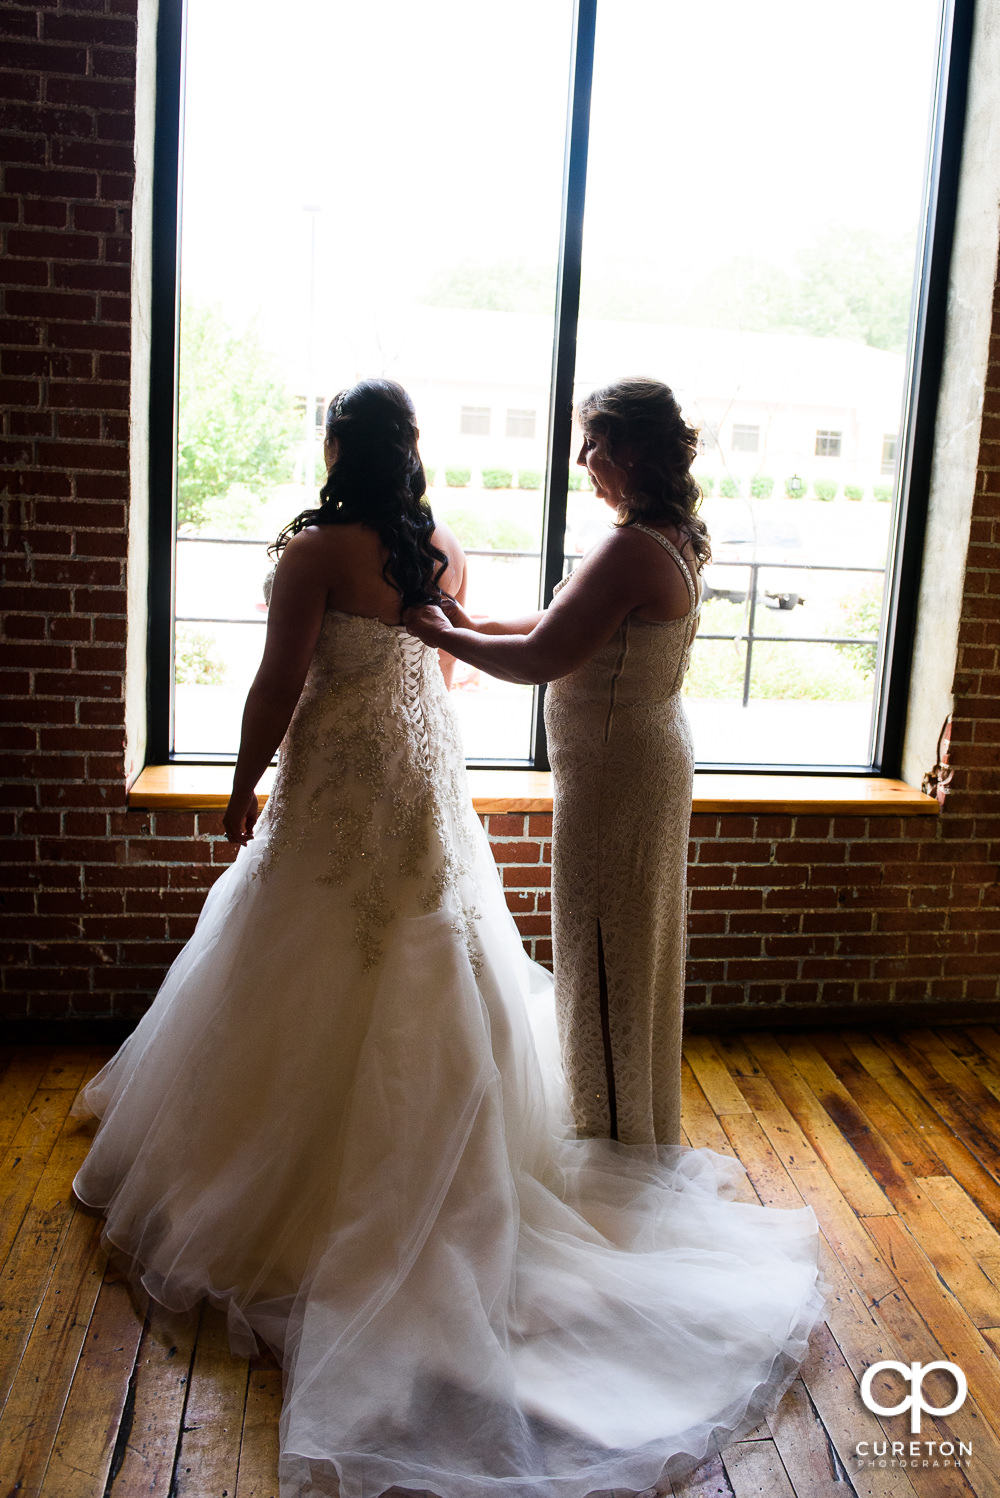 Bride's mom helping her into the dress.